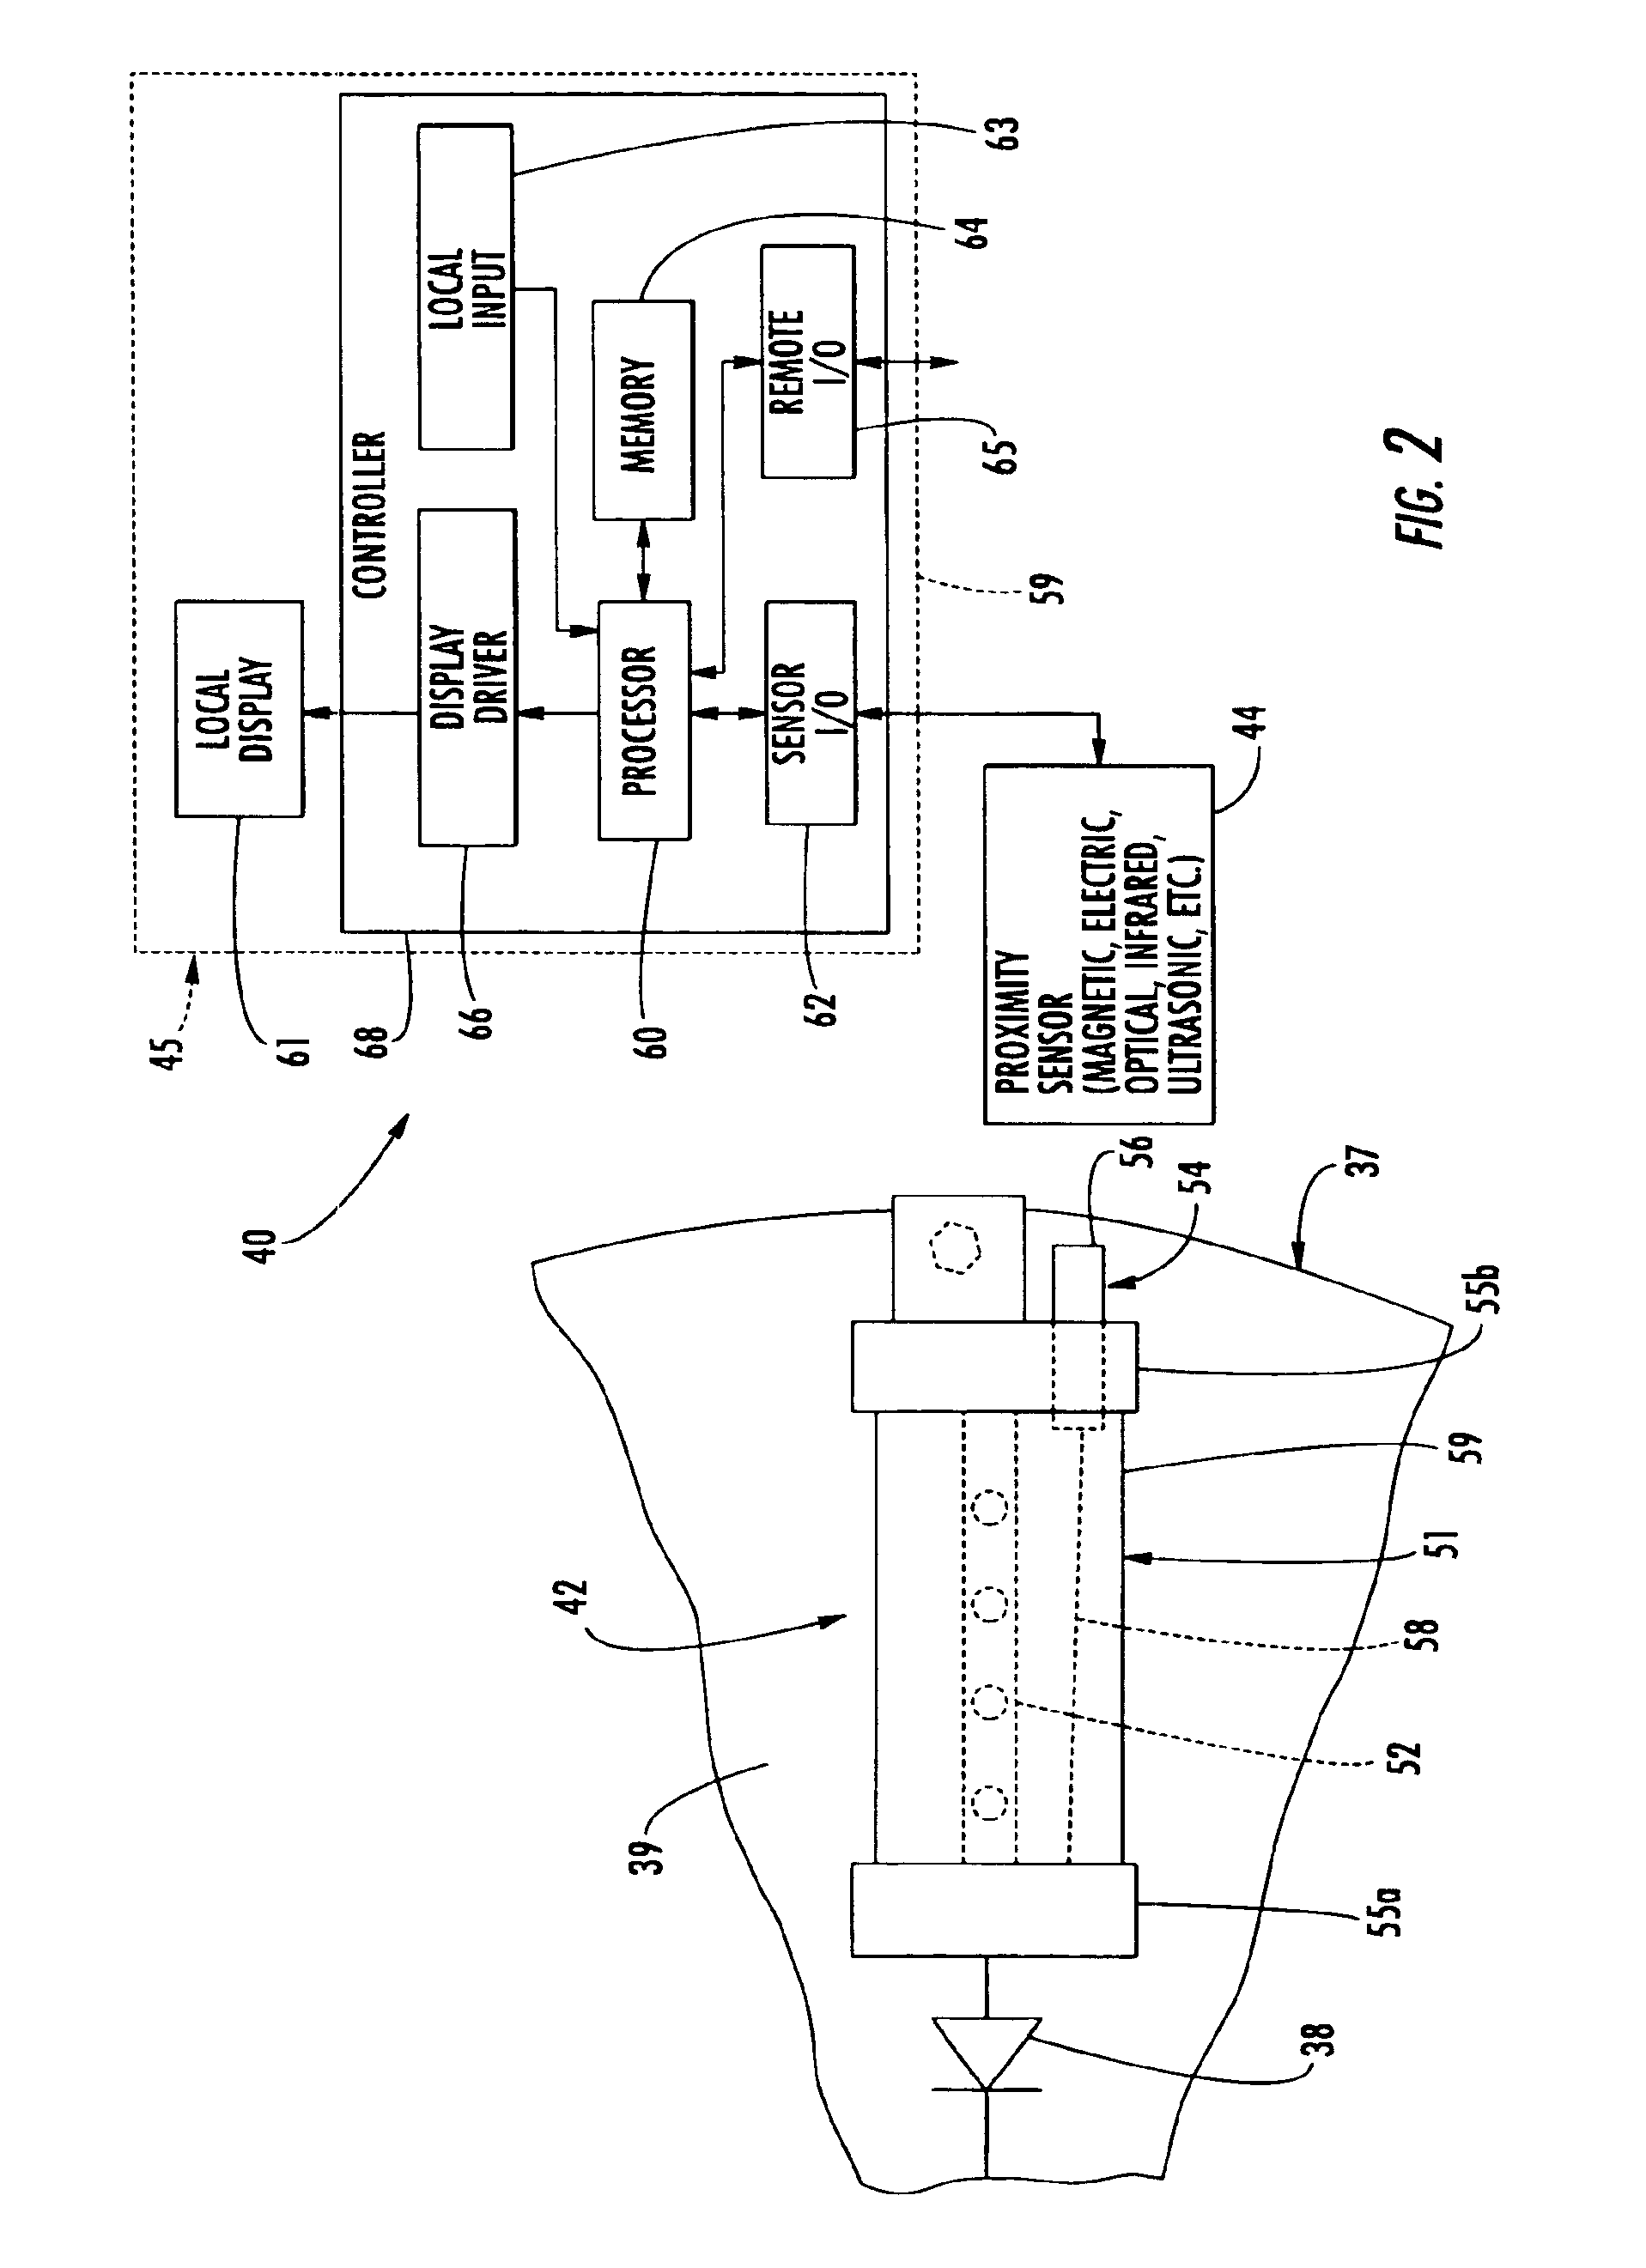 Sensing apparatus for blown fuse of rectifying wheel and associated methods